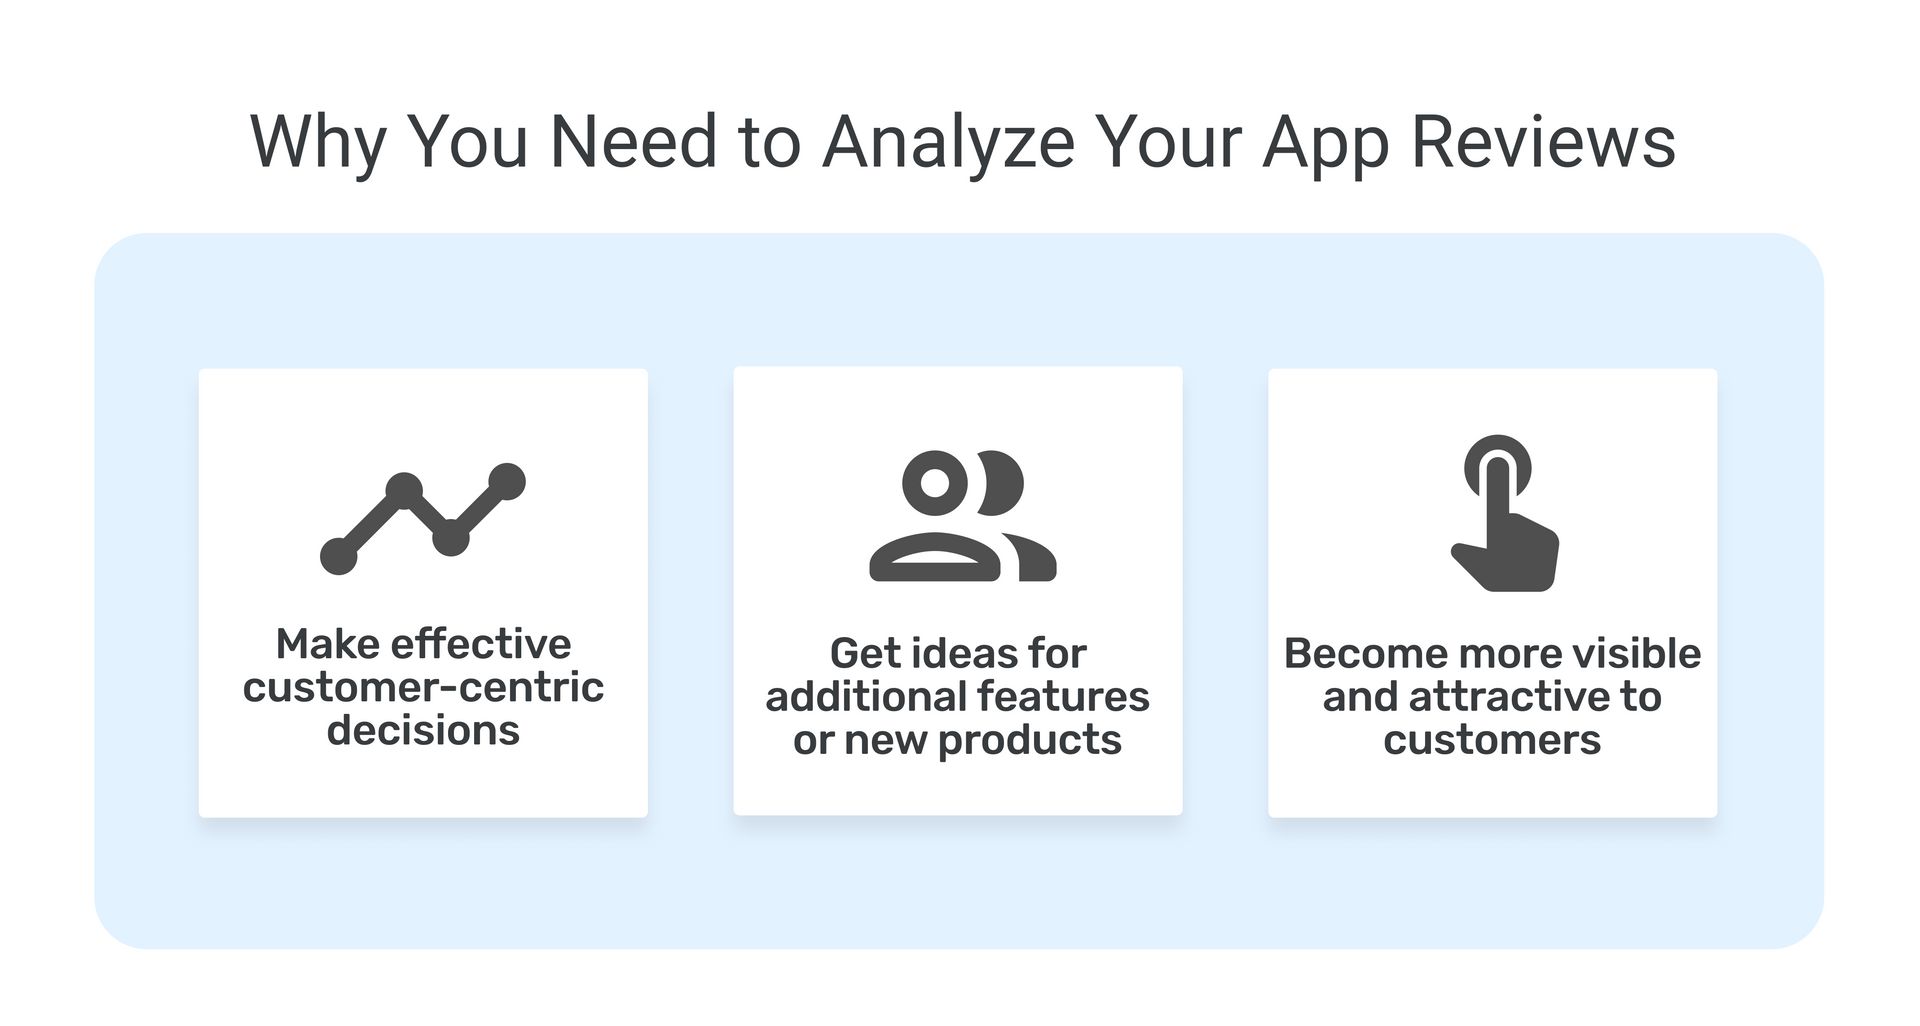 App review analysis is important as you can make effective decisions, get ideas for new features and products, and become more visible to customers.